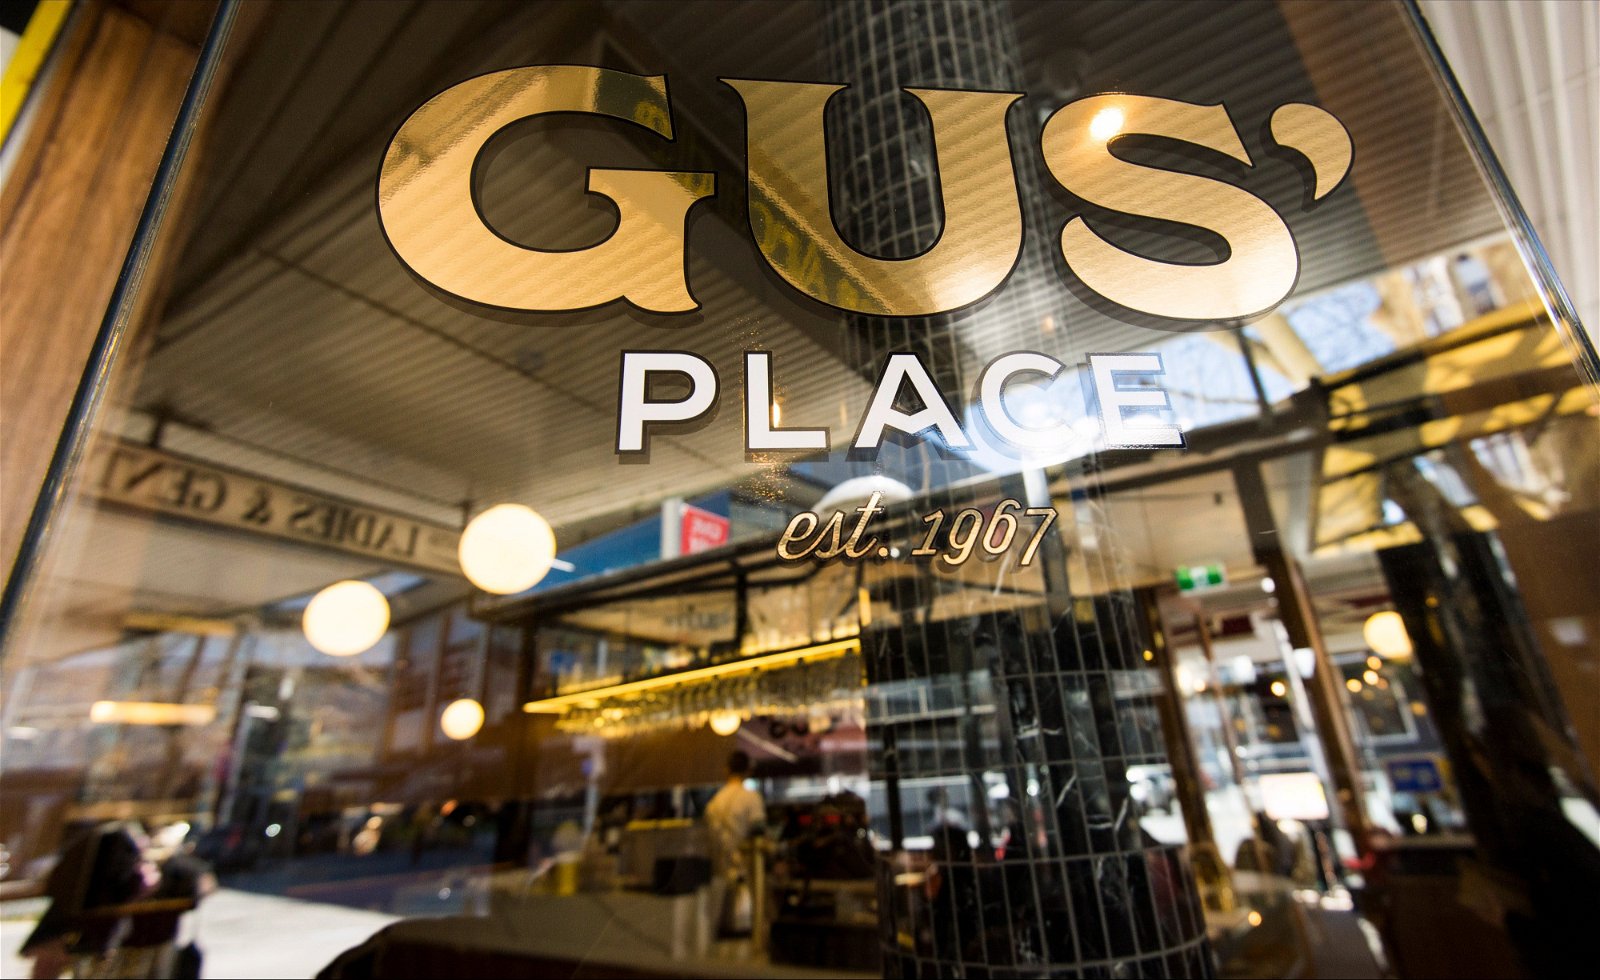 Gus' Place